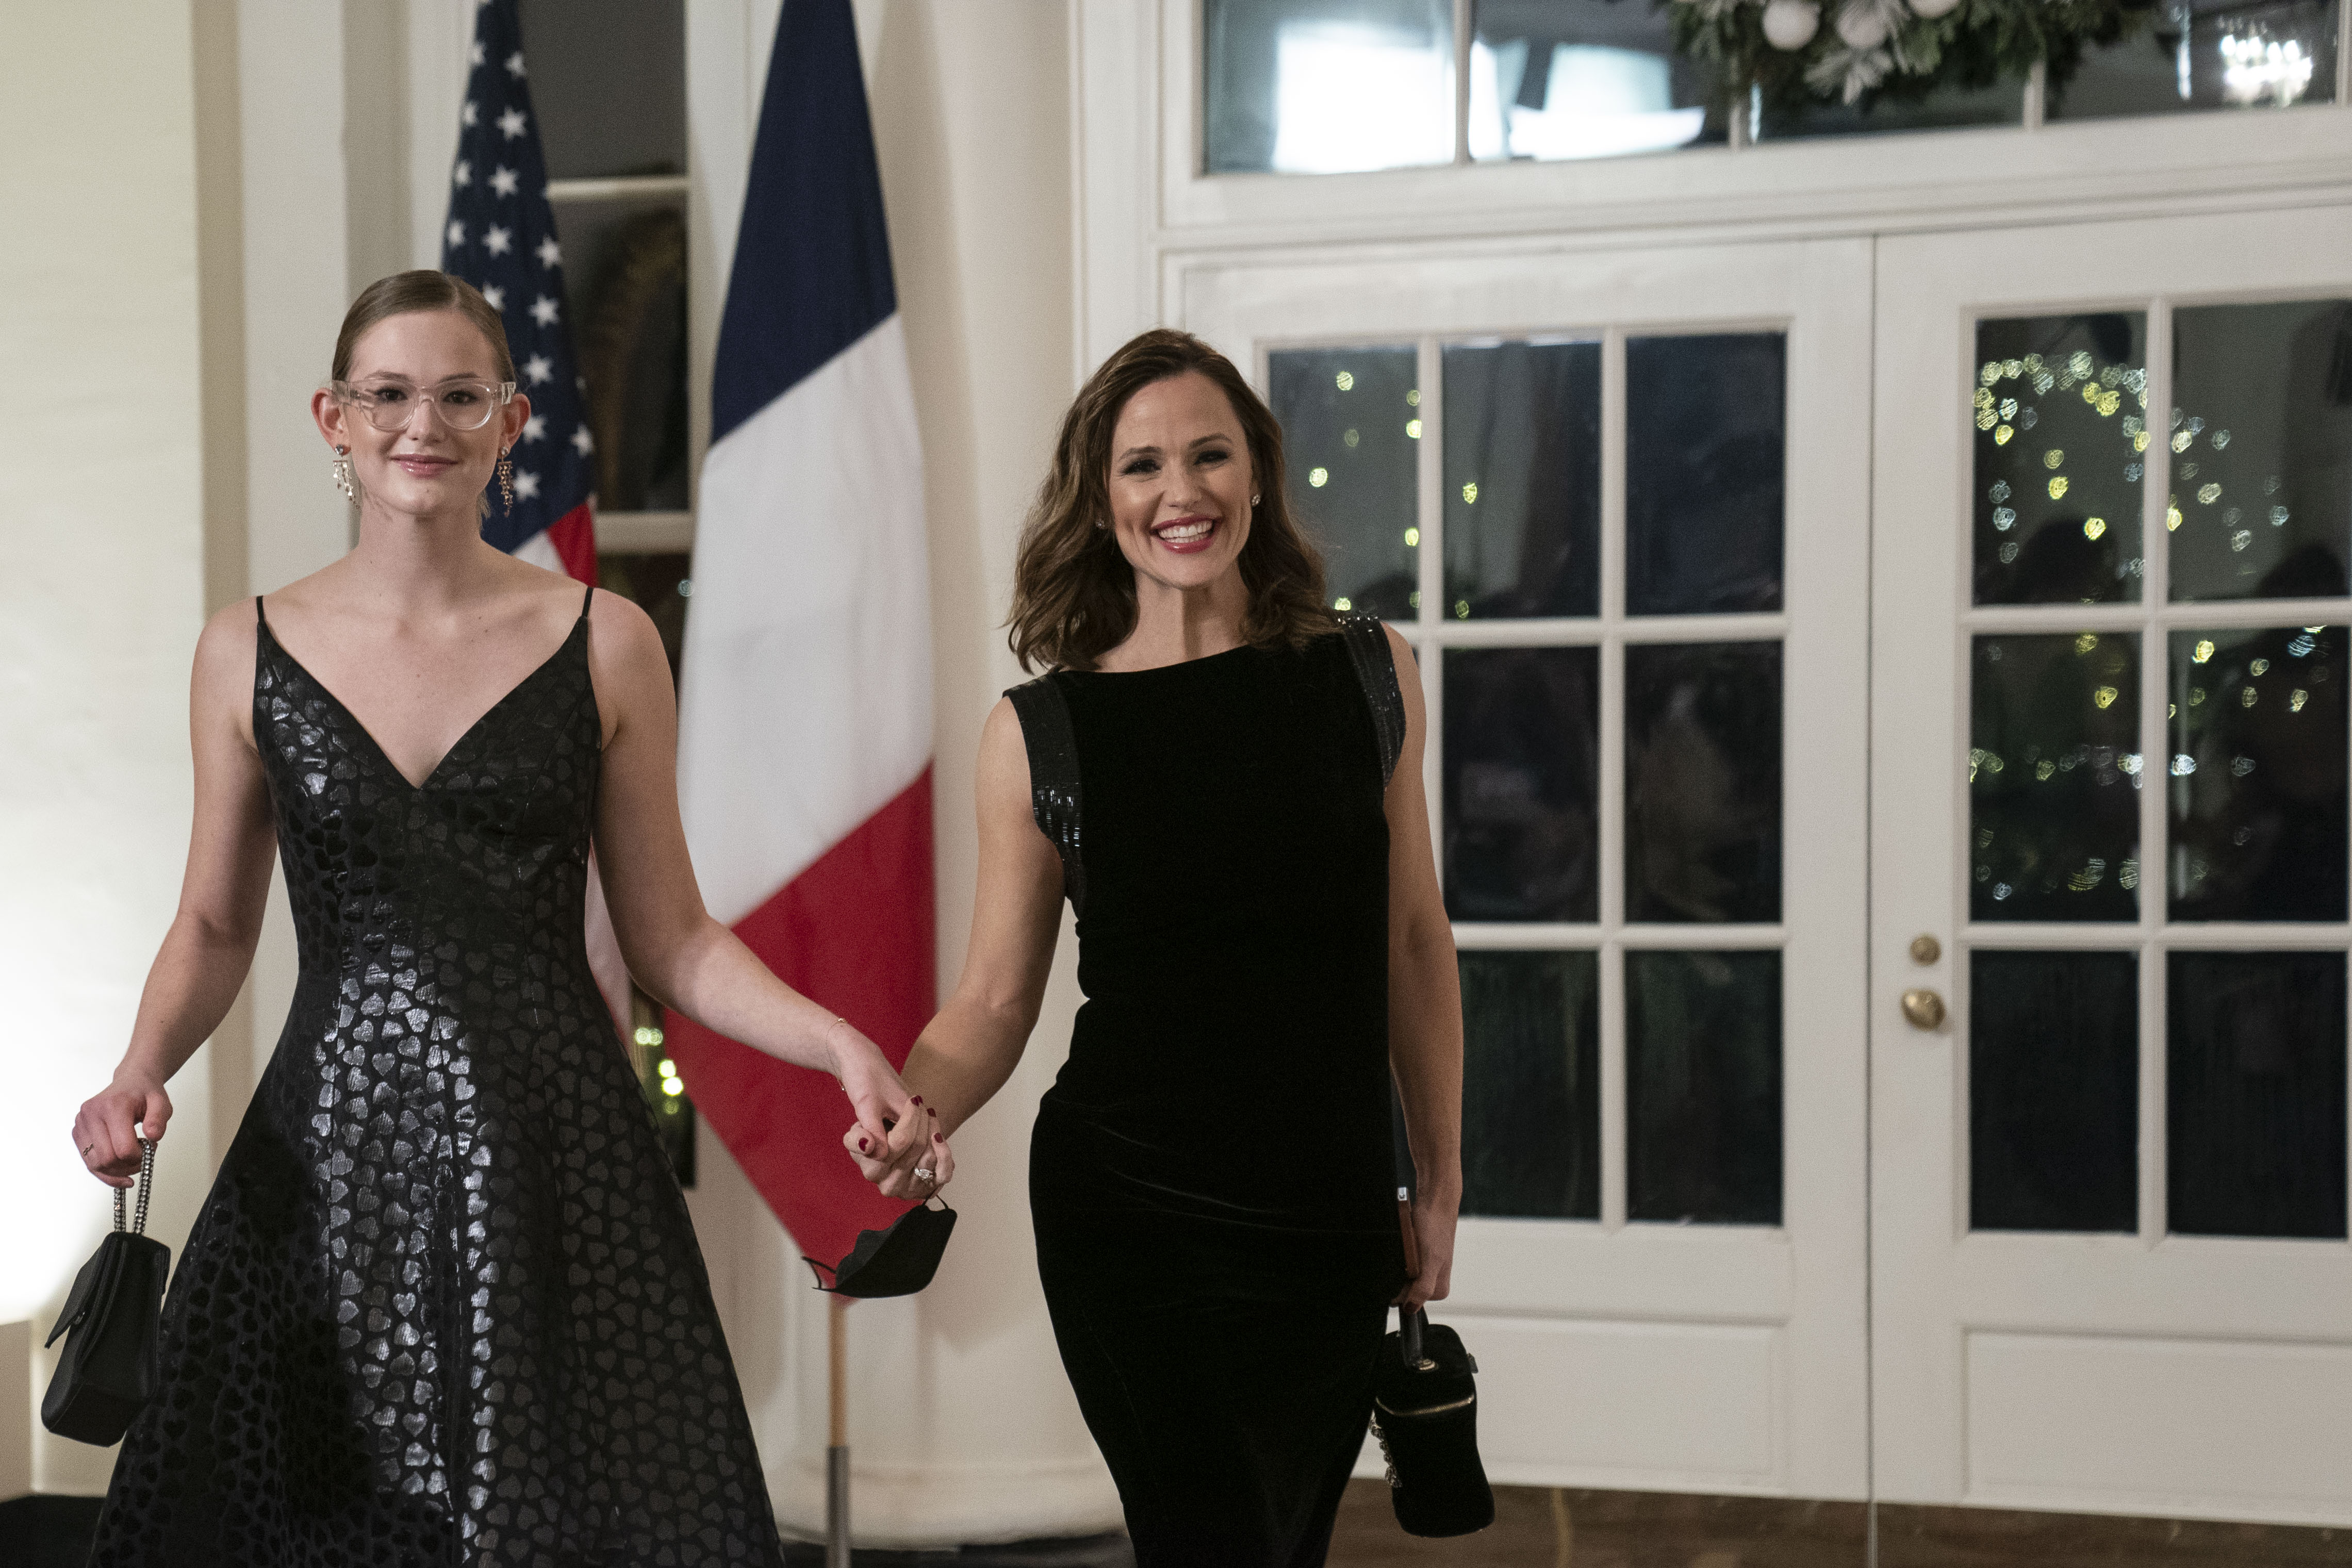 Violet Affleck and Jennifer Garner at a state dinner in honor of French President Emmanuel Macron and Brigitte Macron at the White House in Washington, DC, US, on December 1, 2022. | Source: Getty Images